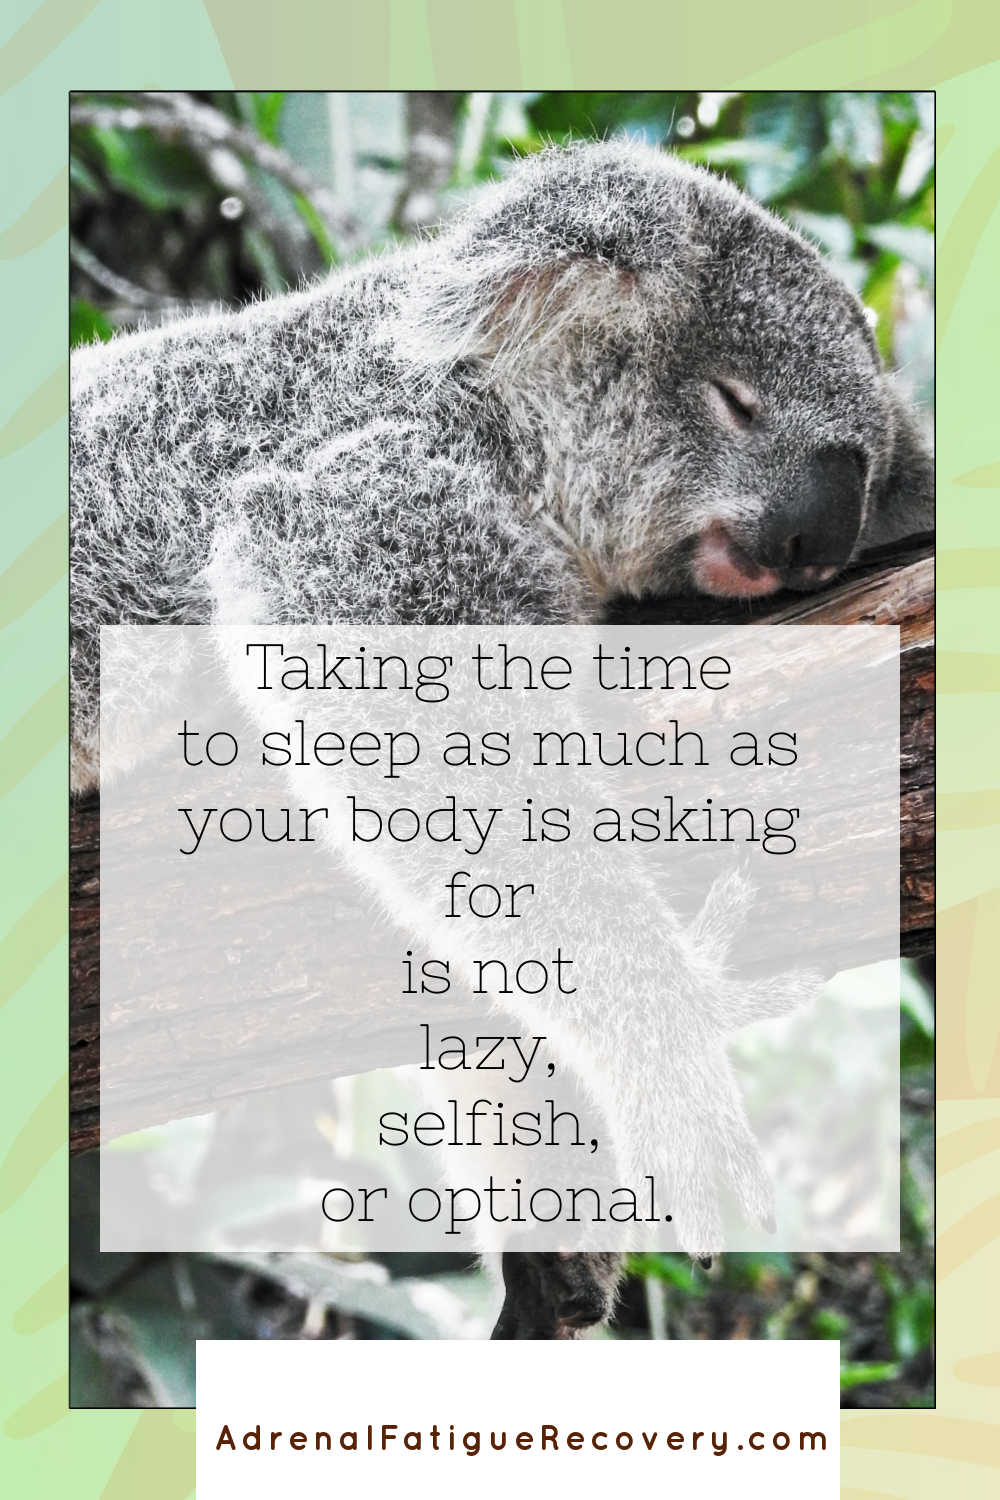 picture of koala napping on a branch with text overlay "Taking the time to sleep as much as your body is asking for is not lazy, selfish, or optional. from www.adrenalfatiguerecovery.com